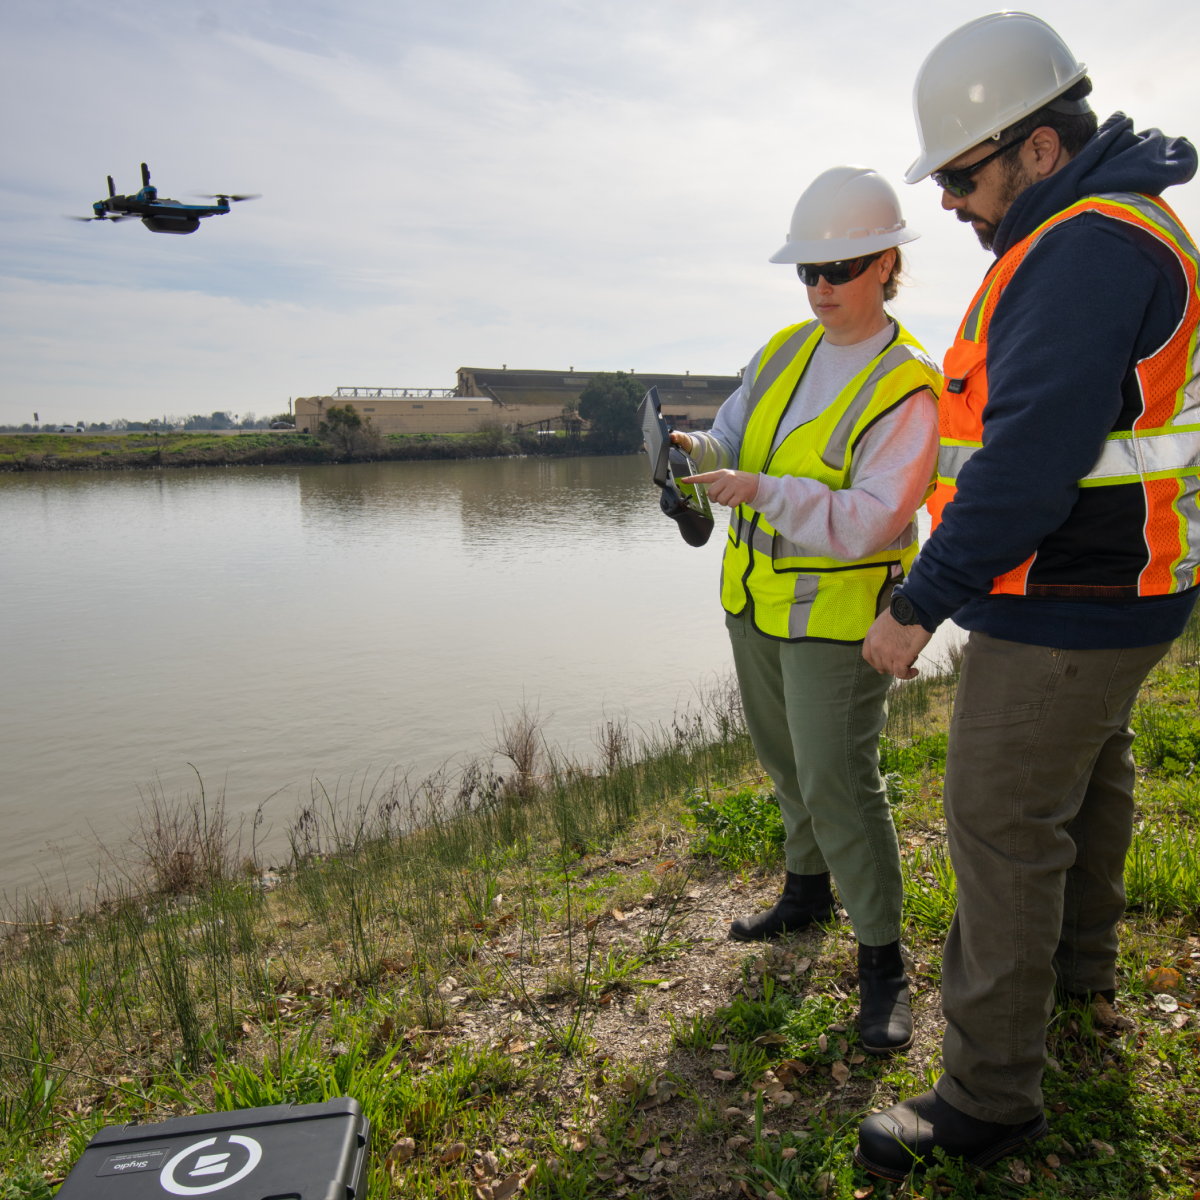 Inspectors training on flying a Skydio drone